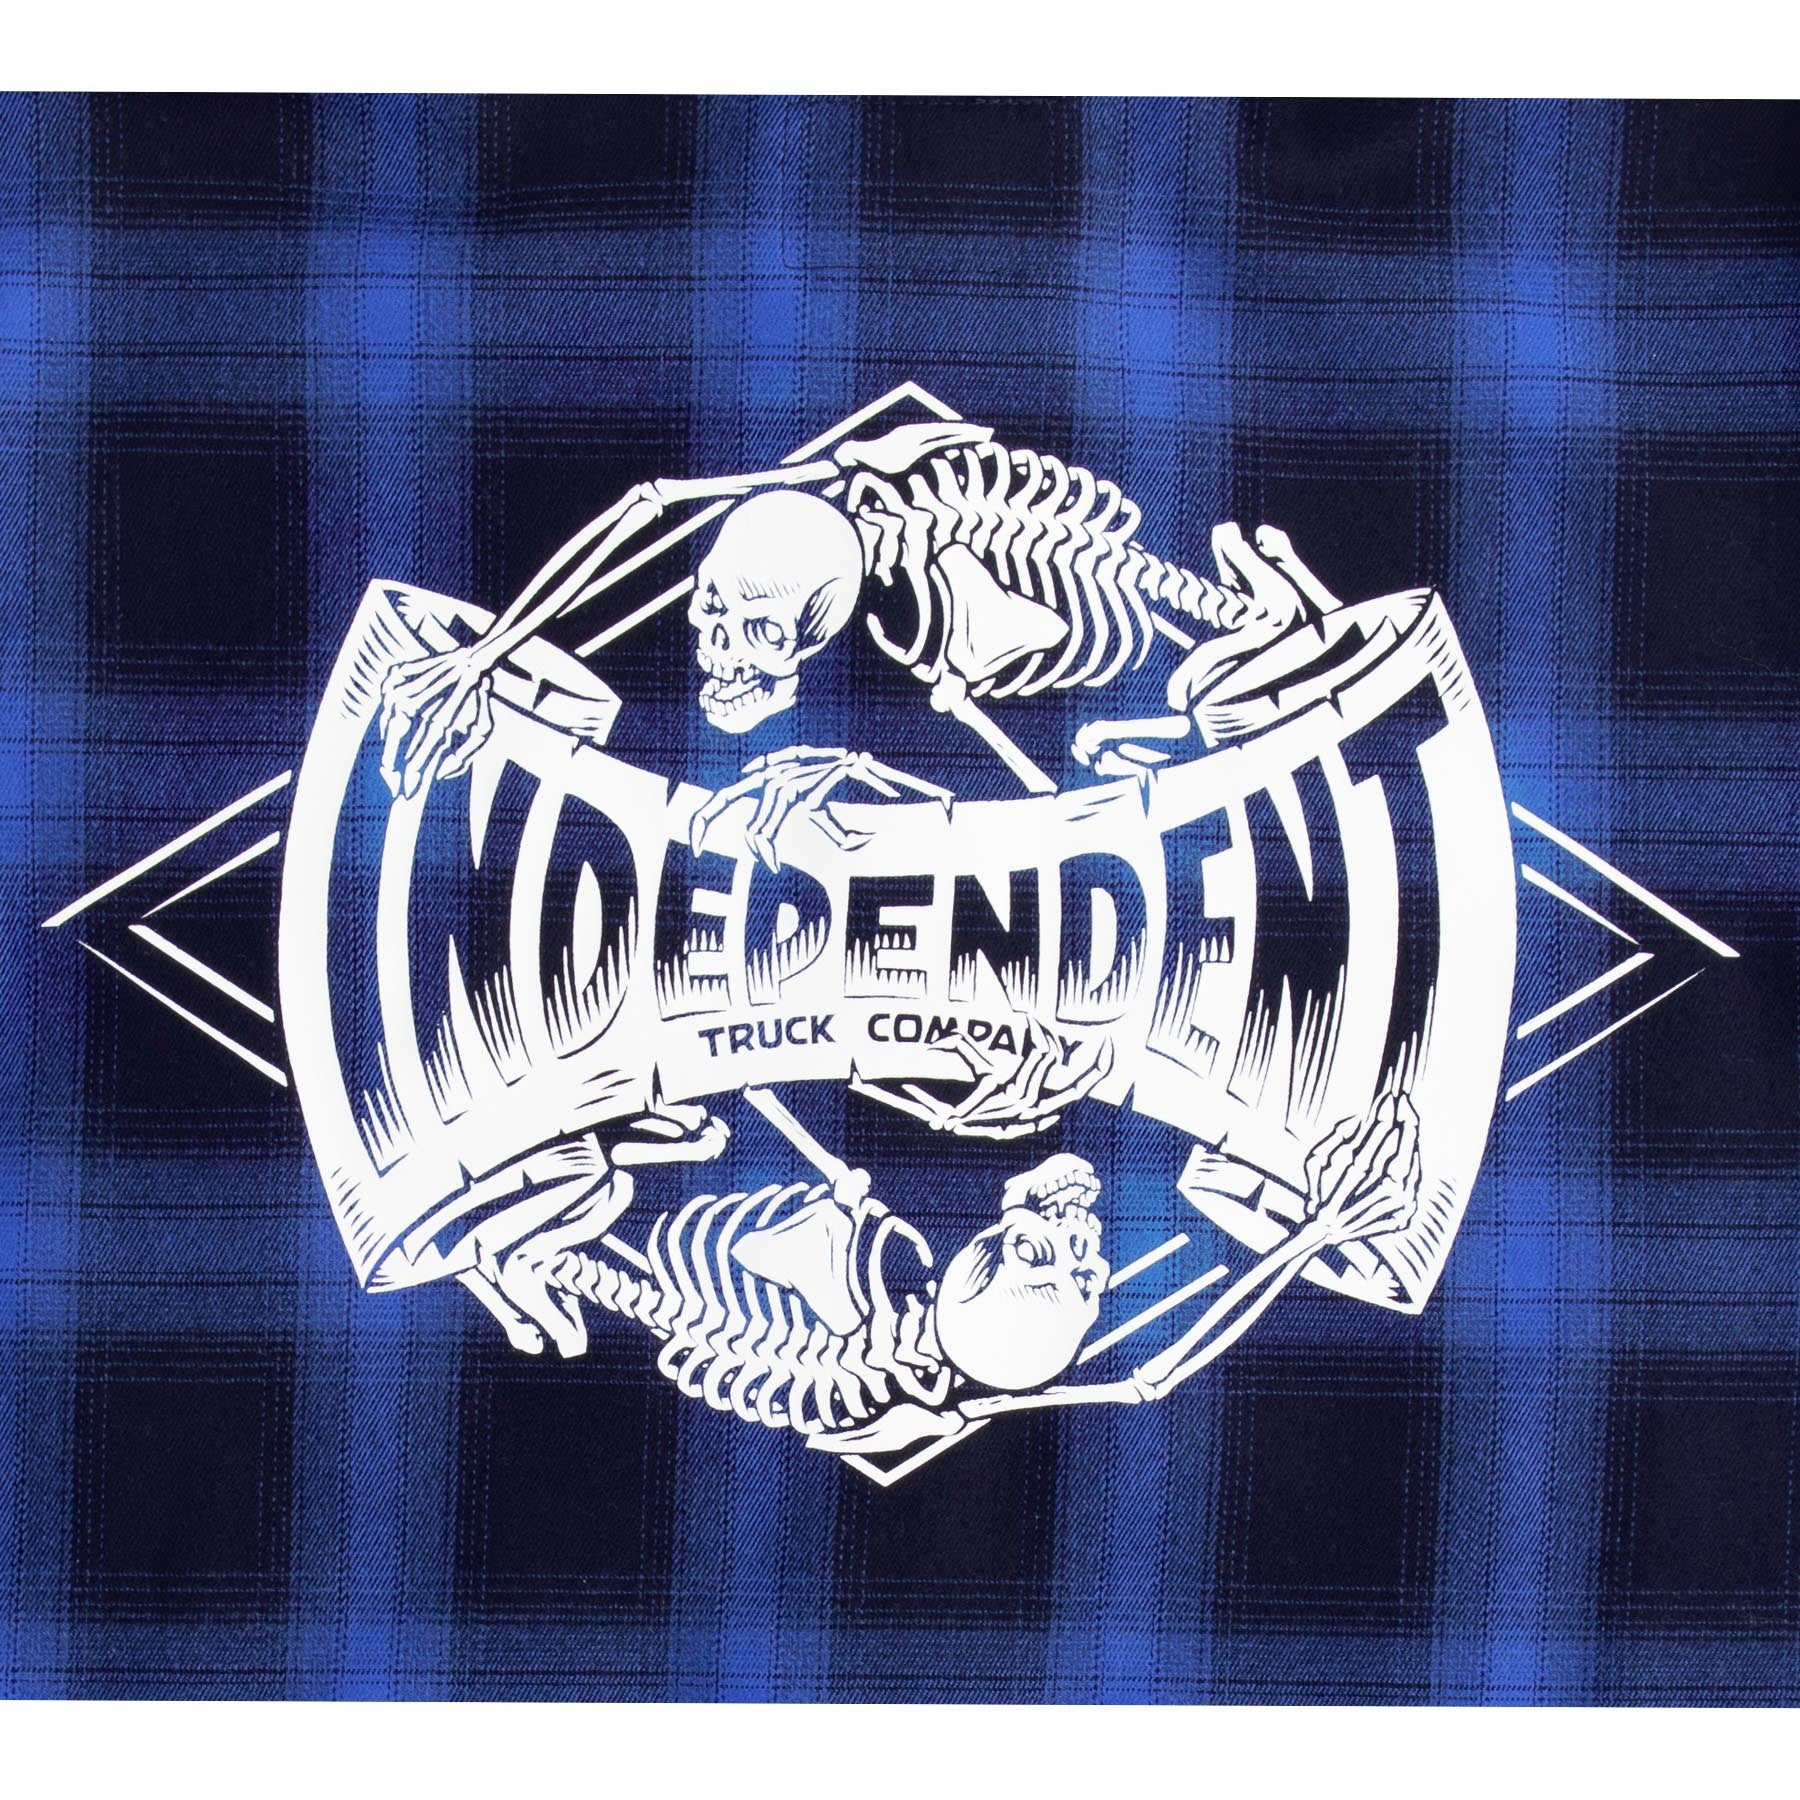 Independent Legacy L/S Flannel - Blue